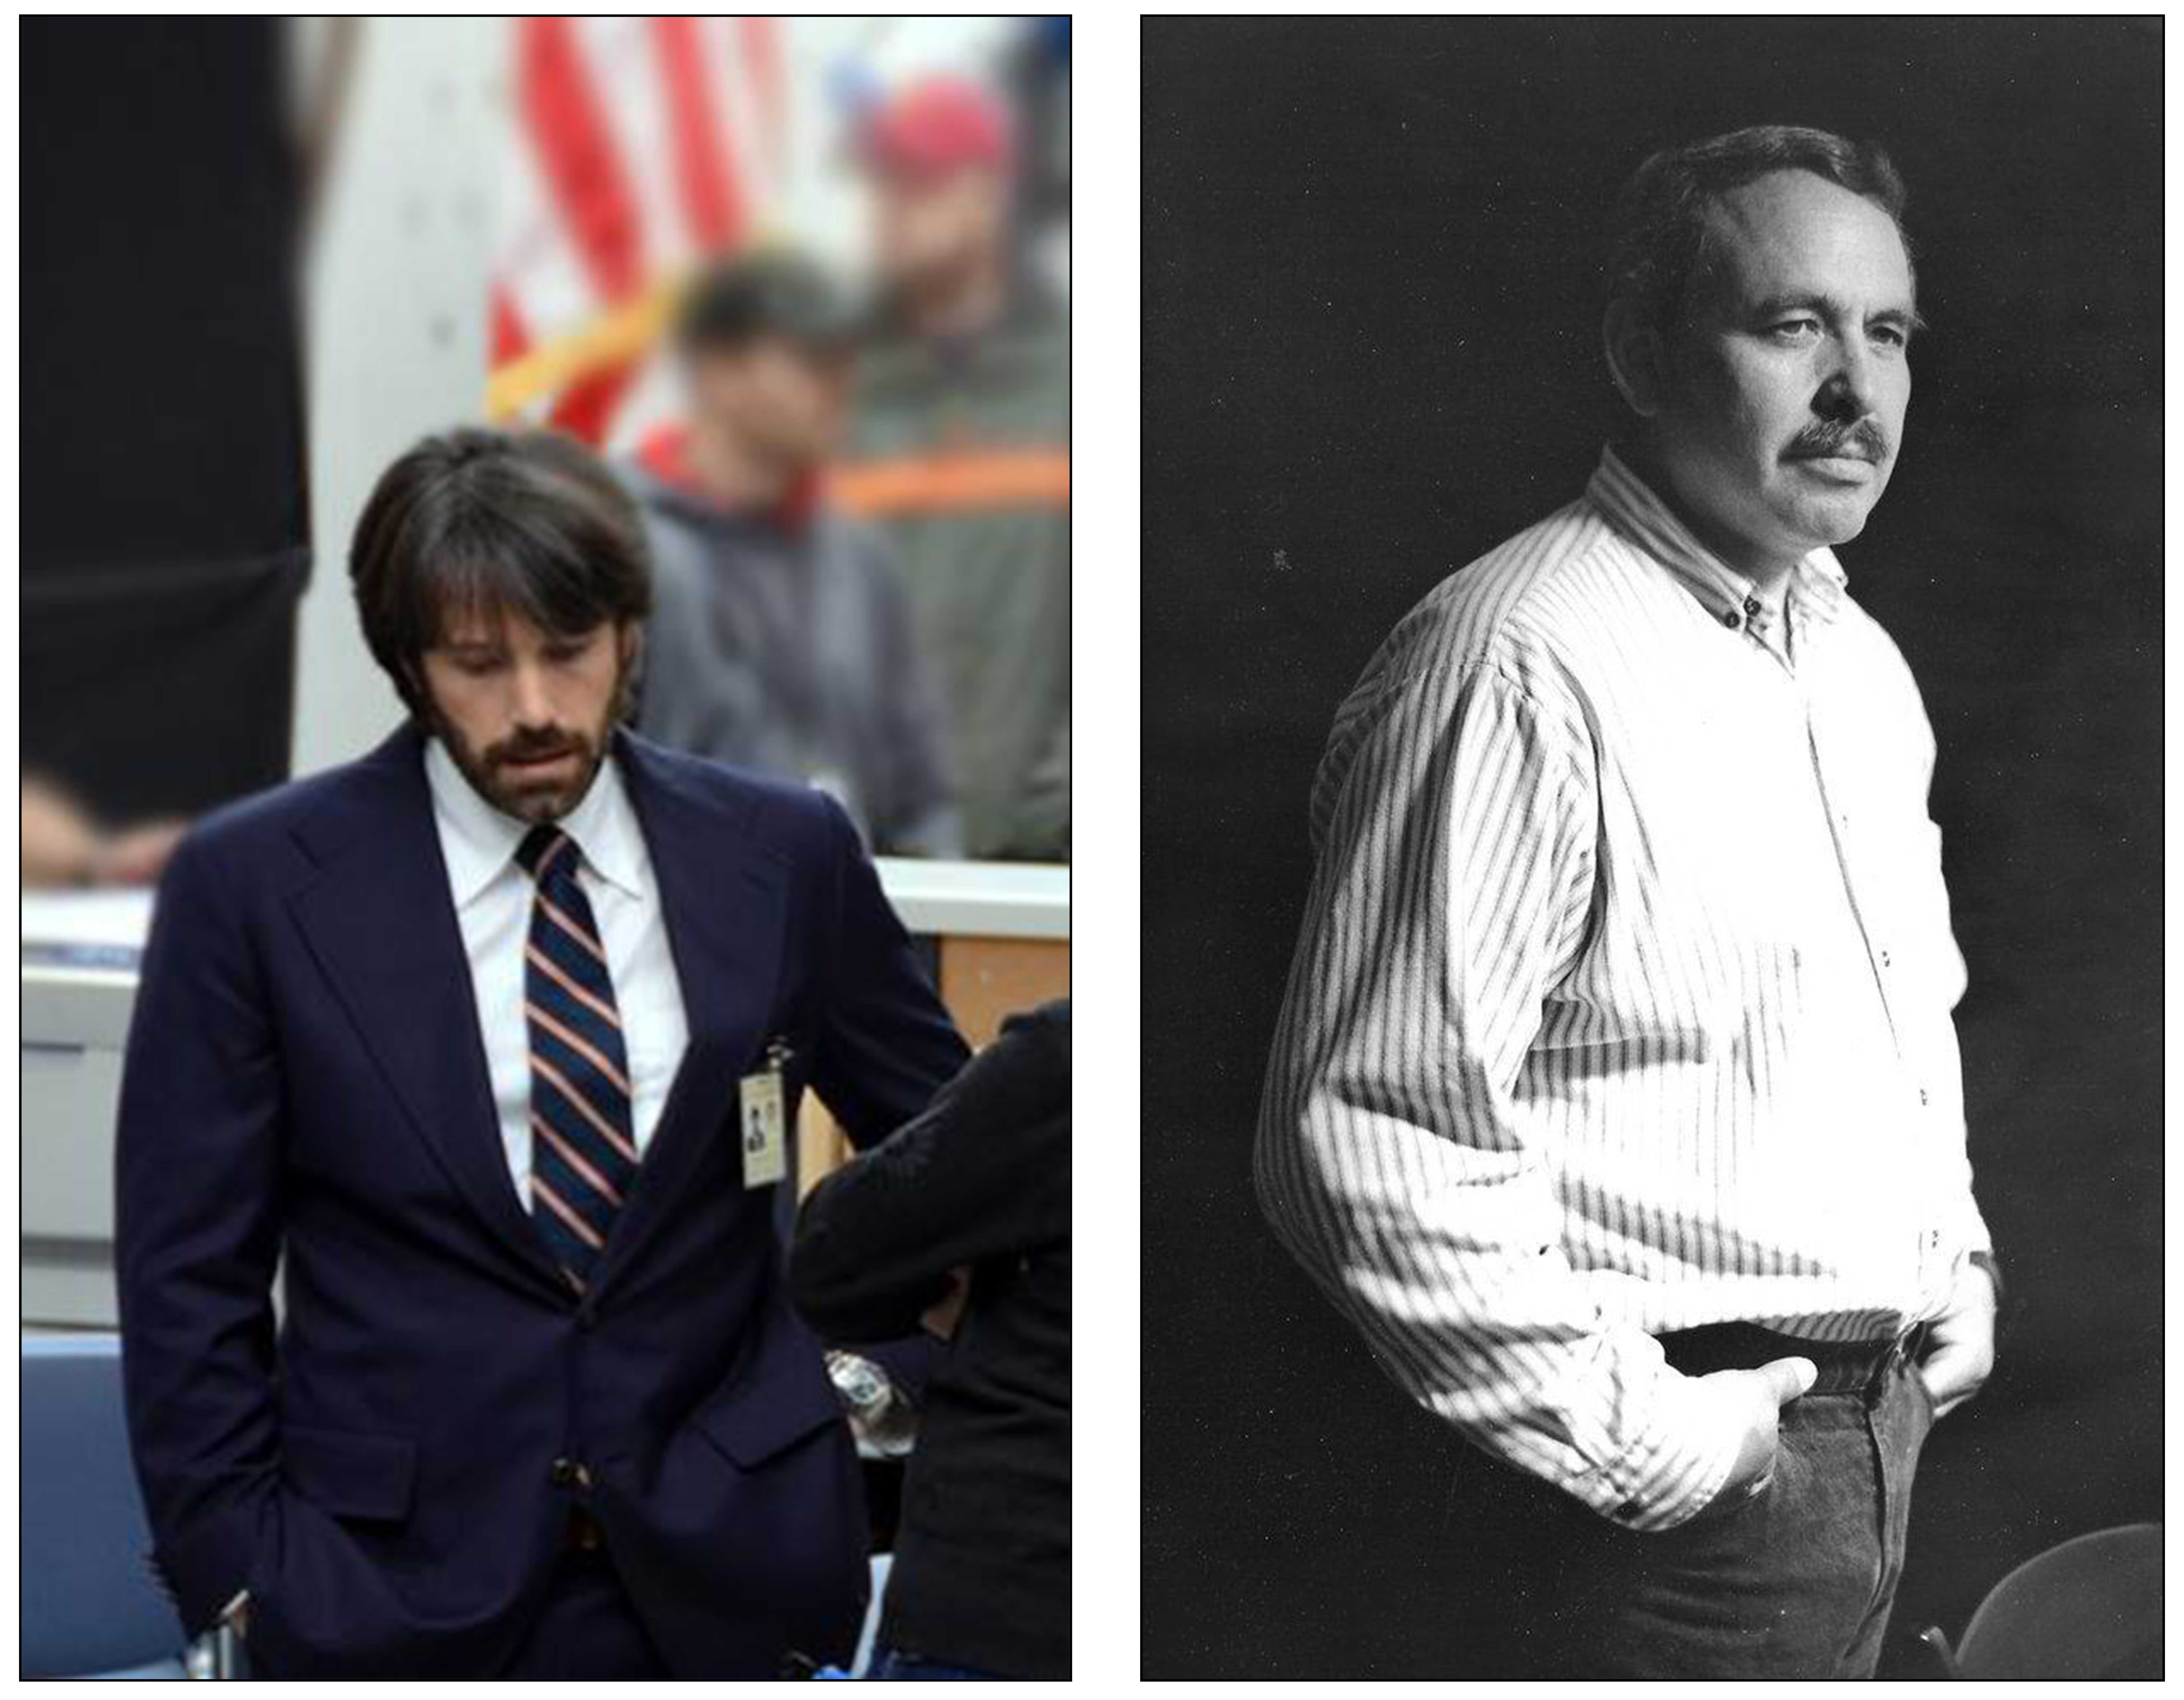 Ben Affleck filming for Argo (2012) in the lobby of CIA Headquarters on the left. Tony Mendez on the right.